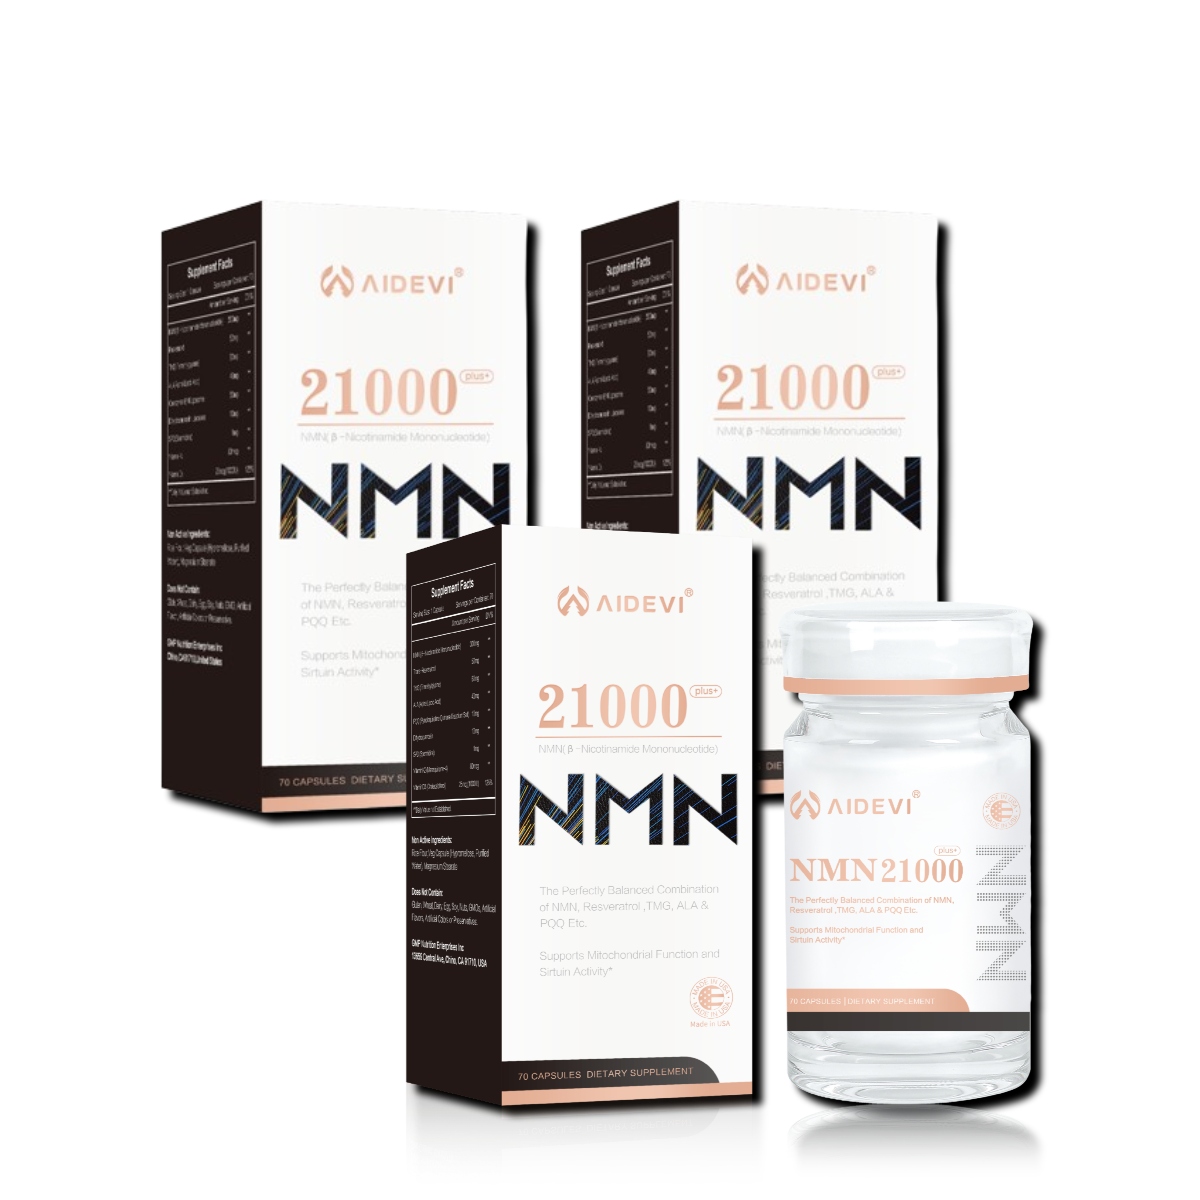 NMN21000 70 Capsules Supplements (Set of 3) -AIDEVI